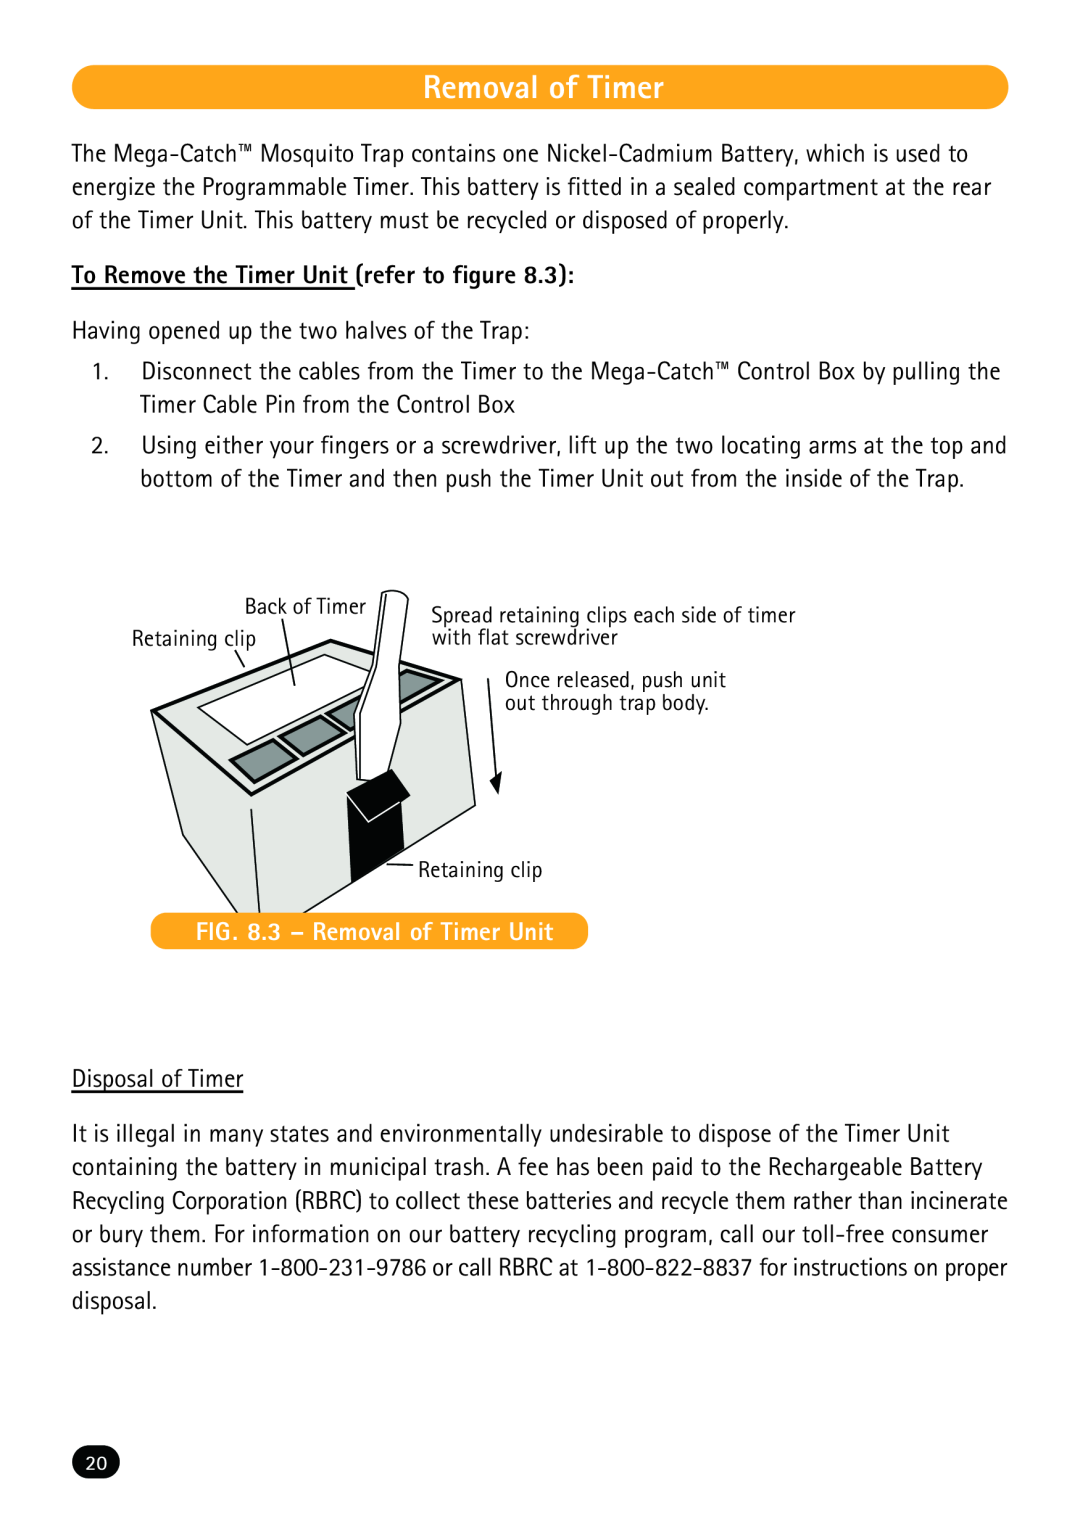 Mega Catch MCP800 operation manual To Remove the Timer Unit refer to figure, 3 - Removal of Timer Unit 